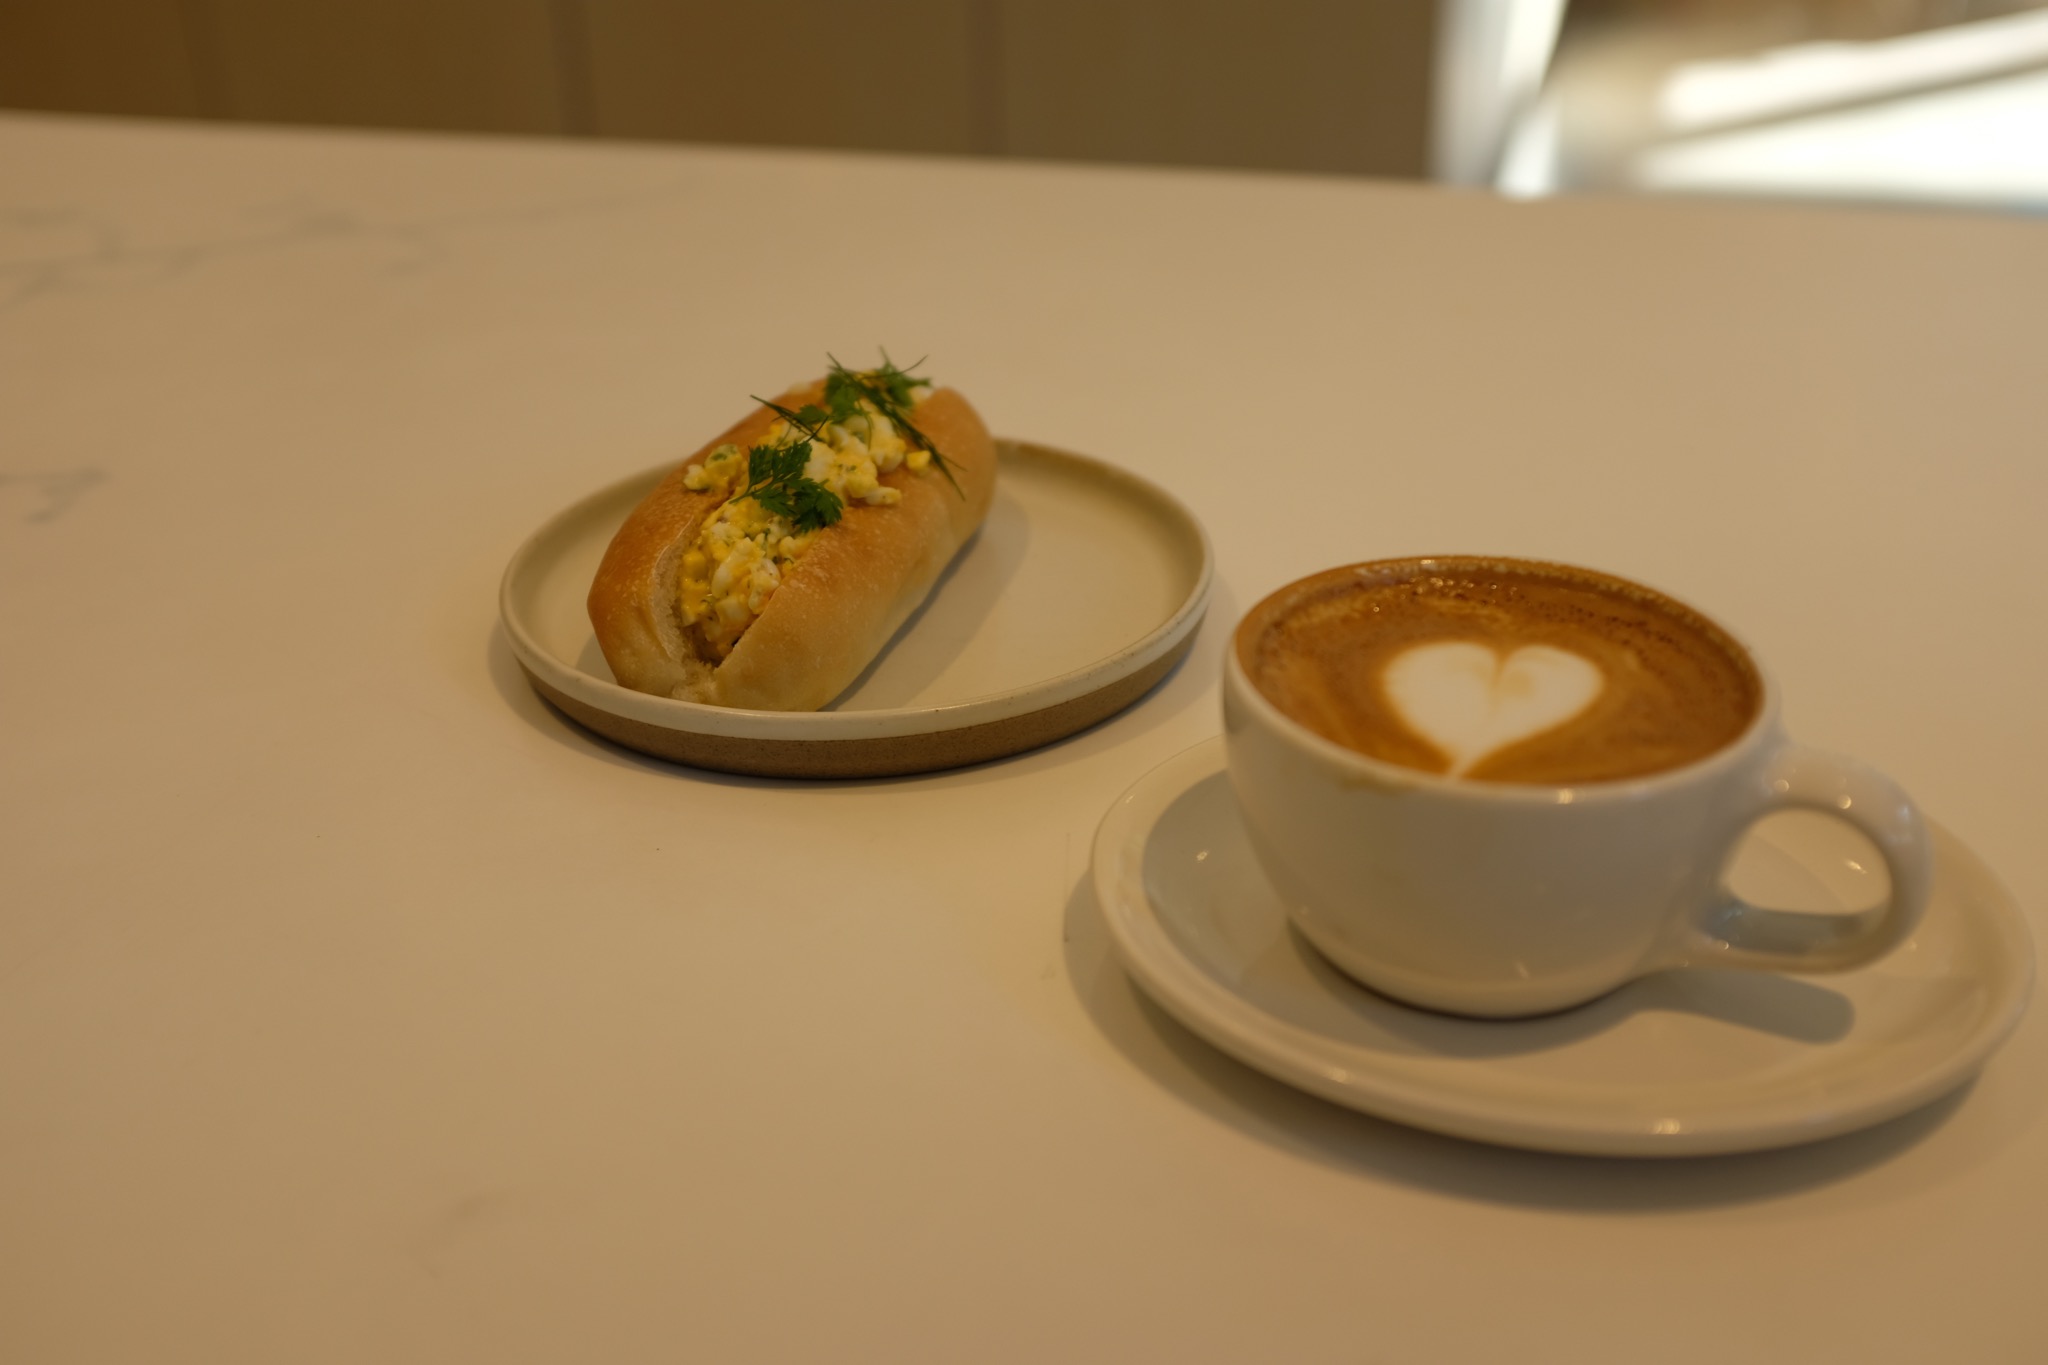 An egg sandwich (cold) served with a cappuccino